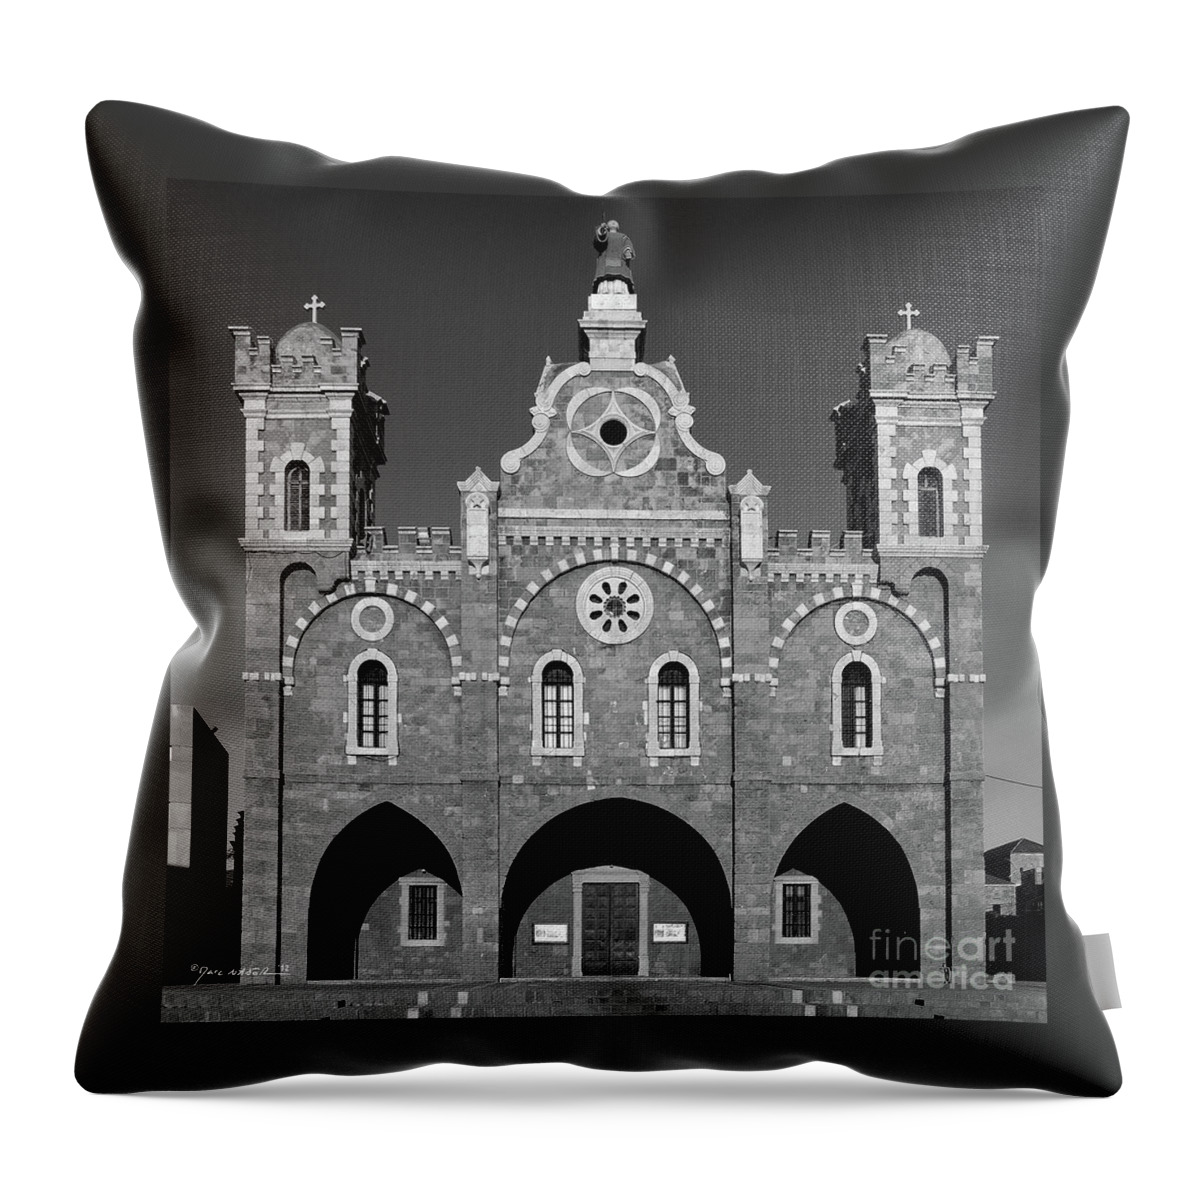 Marc Nader Photo Art Throw Pillow featuring the photograph Saint-Stephen Cathedral, Batroun, Lebanon by Marc Nader